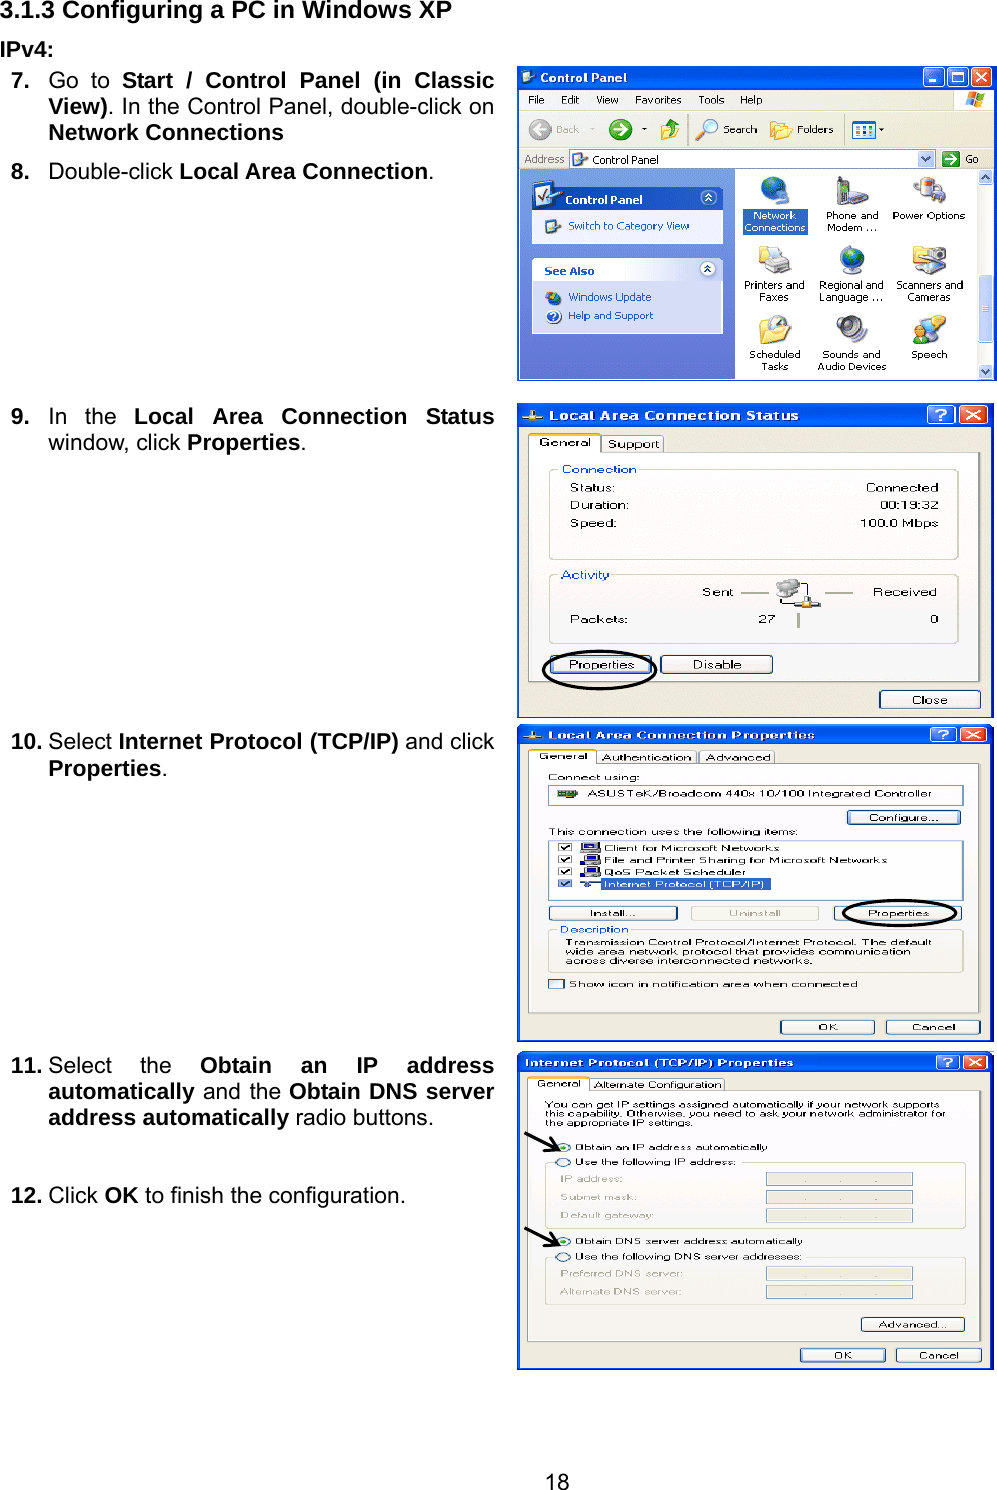 18 3.1.3 Configuring a PC in Windows XP    IPv4: 7.  Go to Start / Control Panel (in Classic View). In the Control Panel, double-click on Network Connections 8.  Double-click Local Area Connection.  9.  In the Local Area Connection Status window, click Properties. 10. Select Internet Protocol (TCP/IP) and click Properties.  11. Select the Obtain an IP address automatically and the Obtain DNS server address automatically radio buttons.  12. Click OK to finish the configuration.    